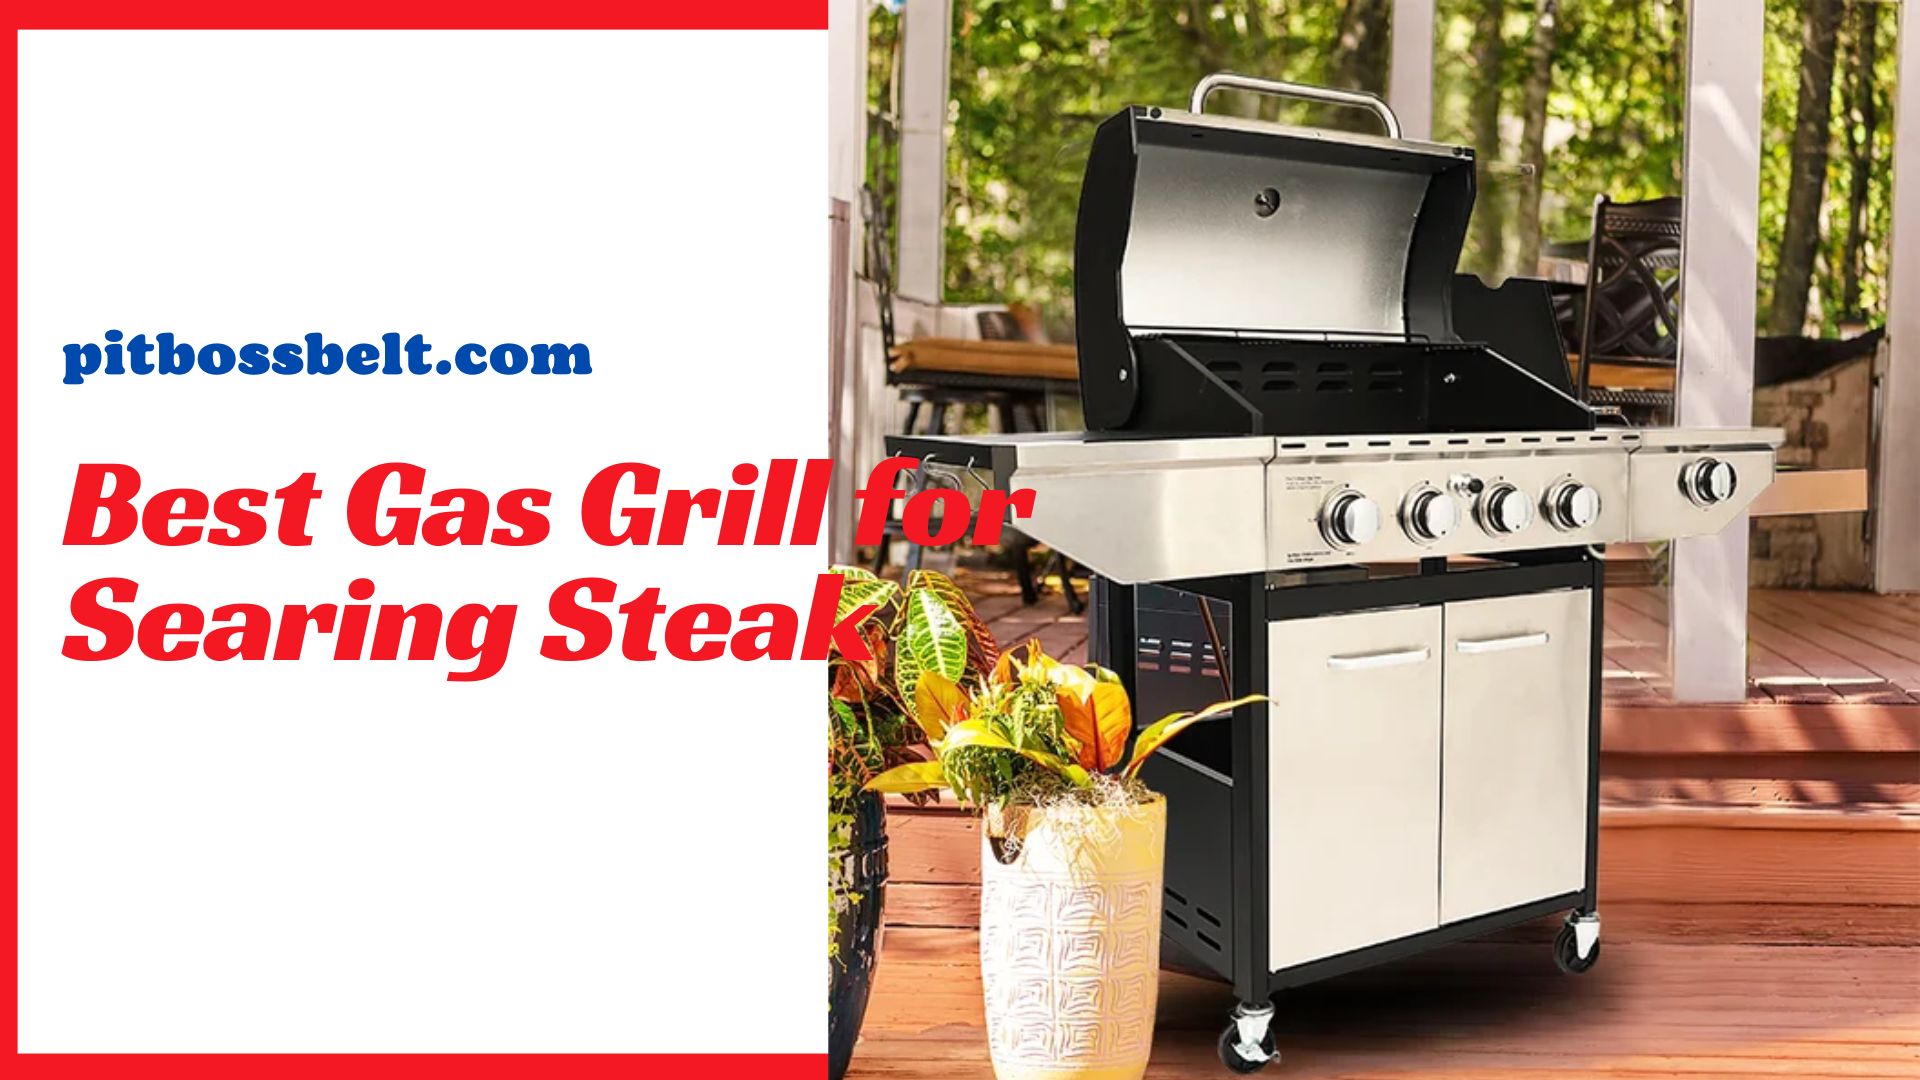 Best Gas Grill for Searing Steak